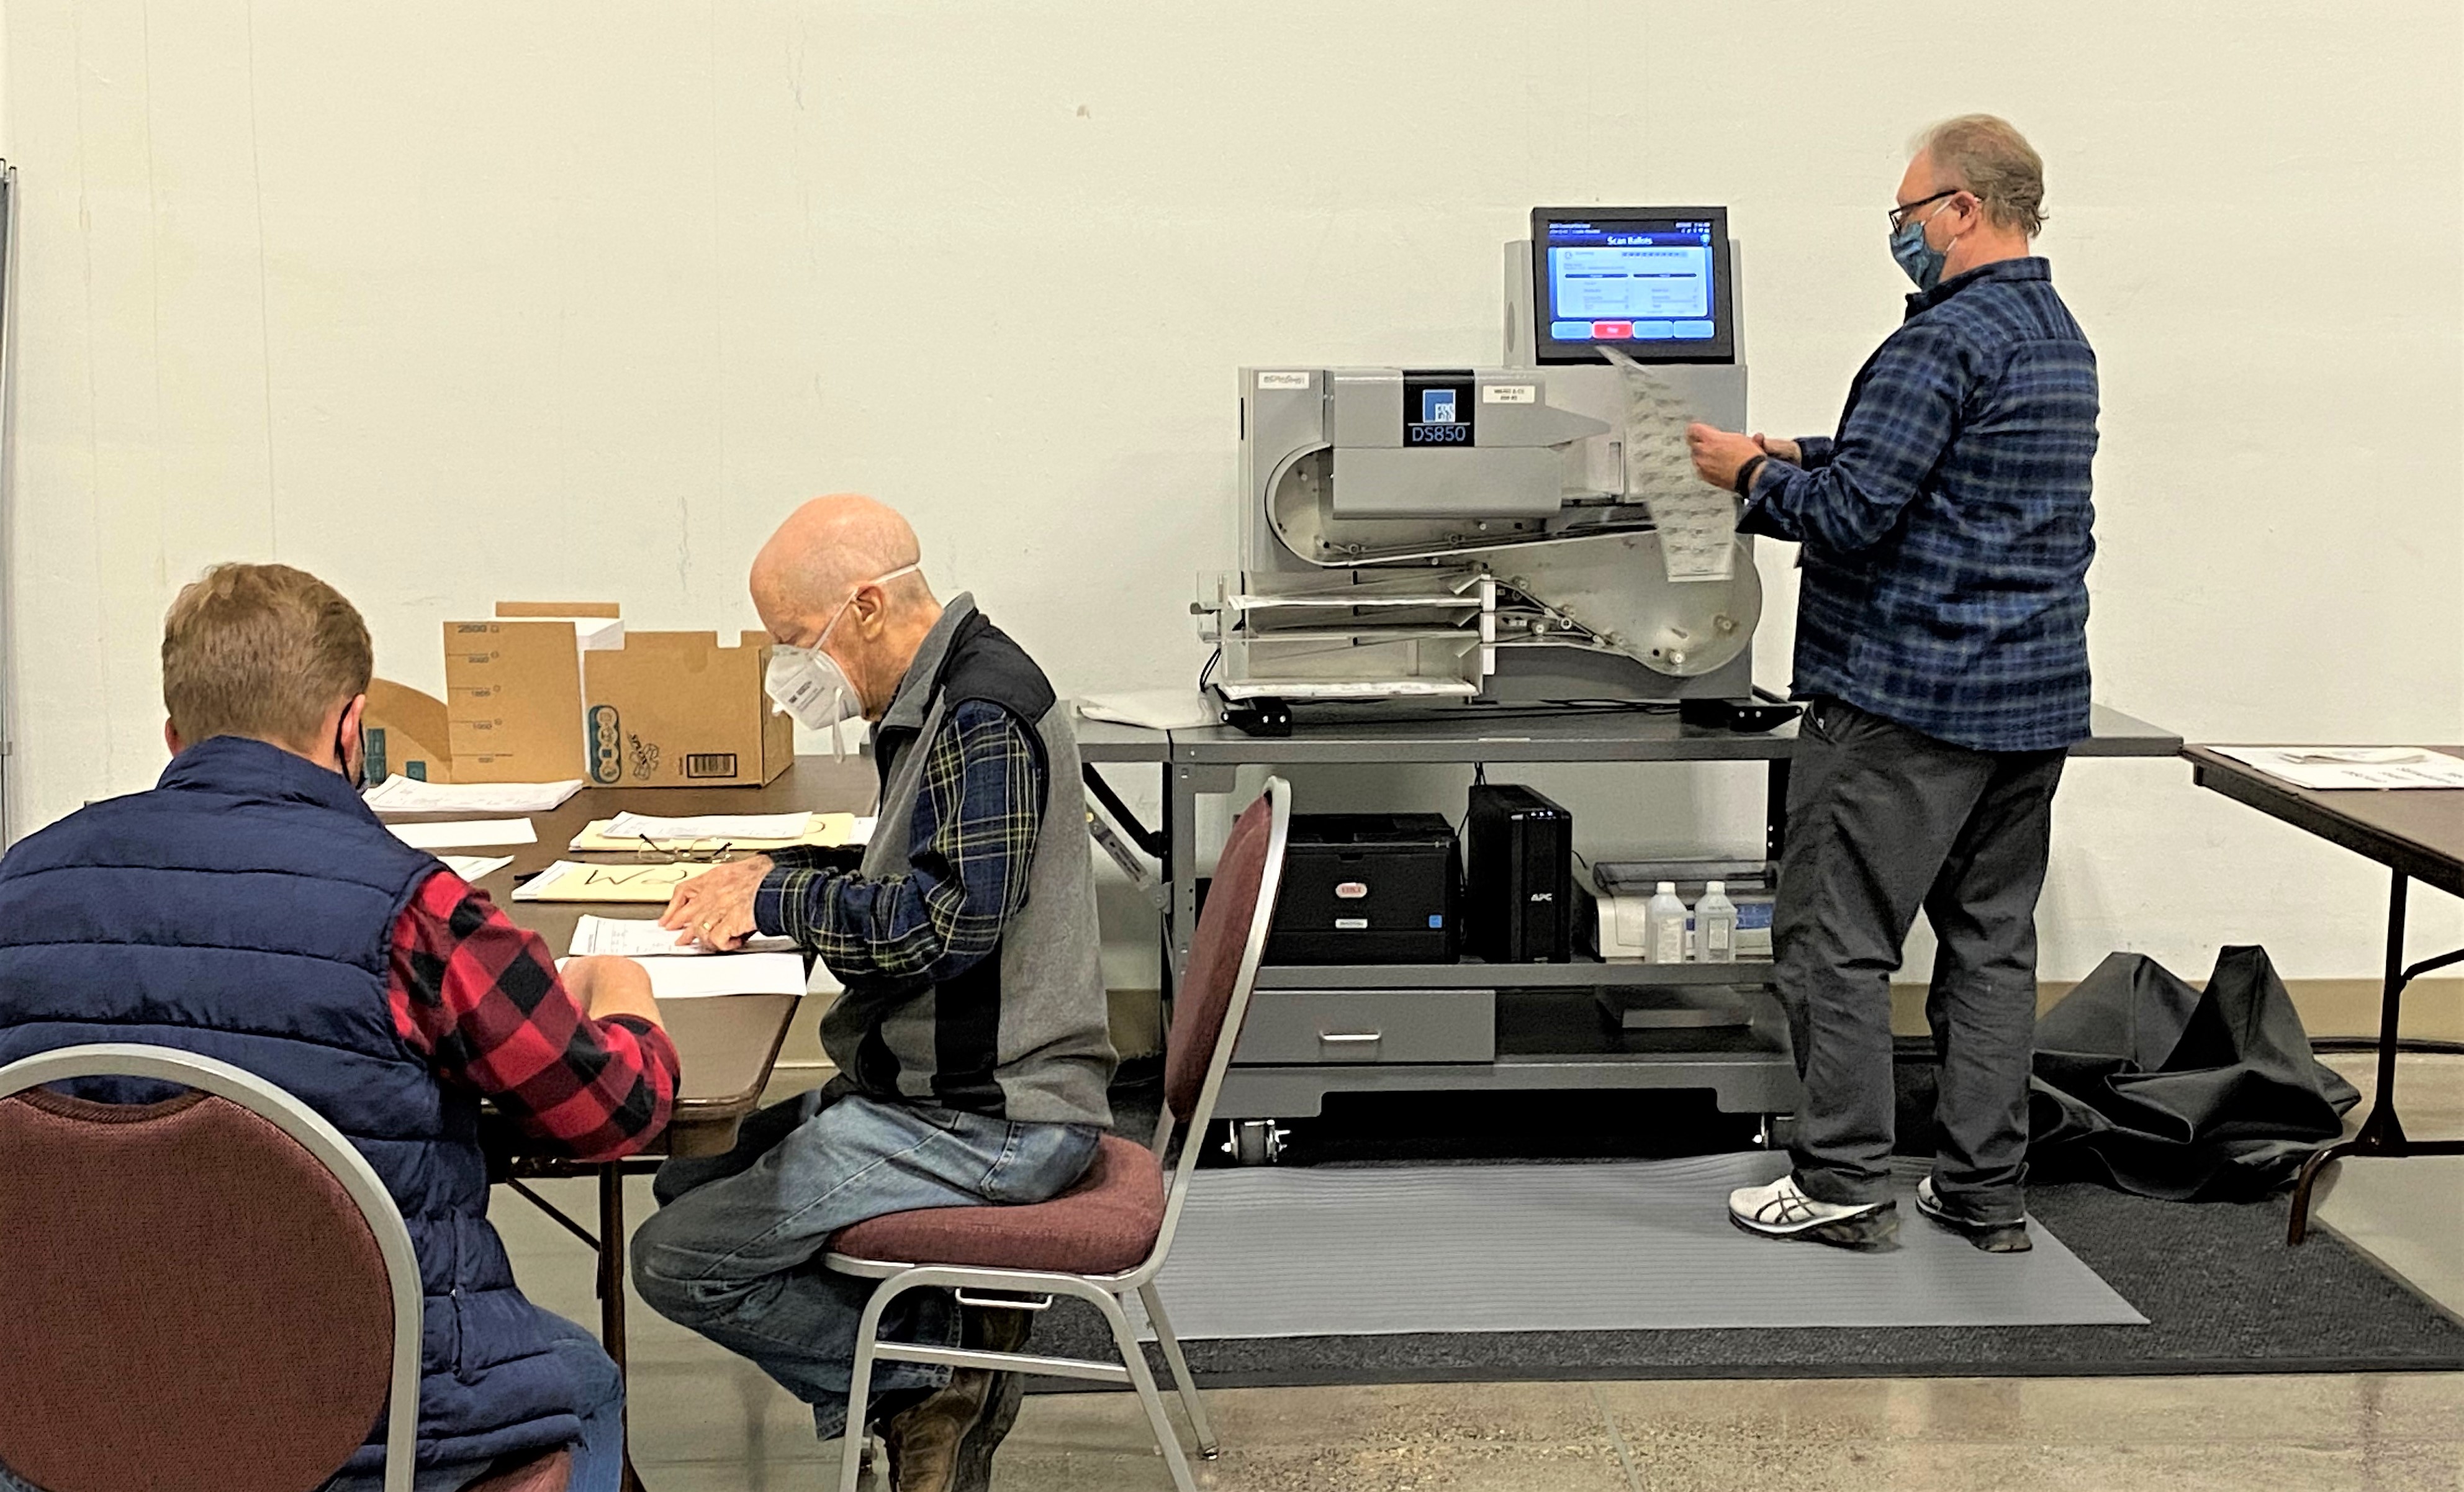 Processing of mail ballots for the 2020 election began on October 21 at the Minneapolis Convention Center.